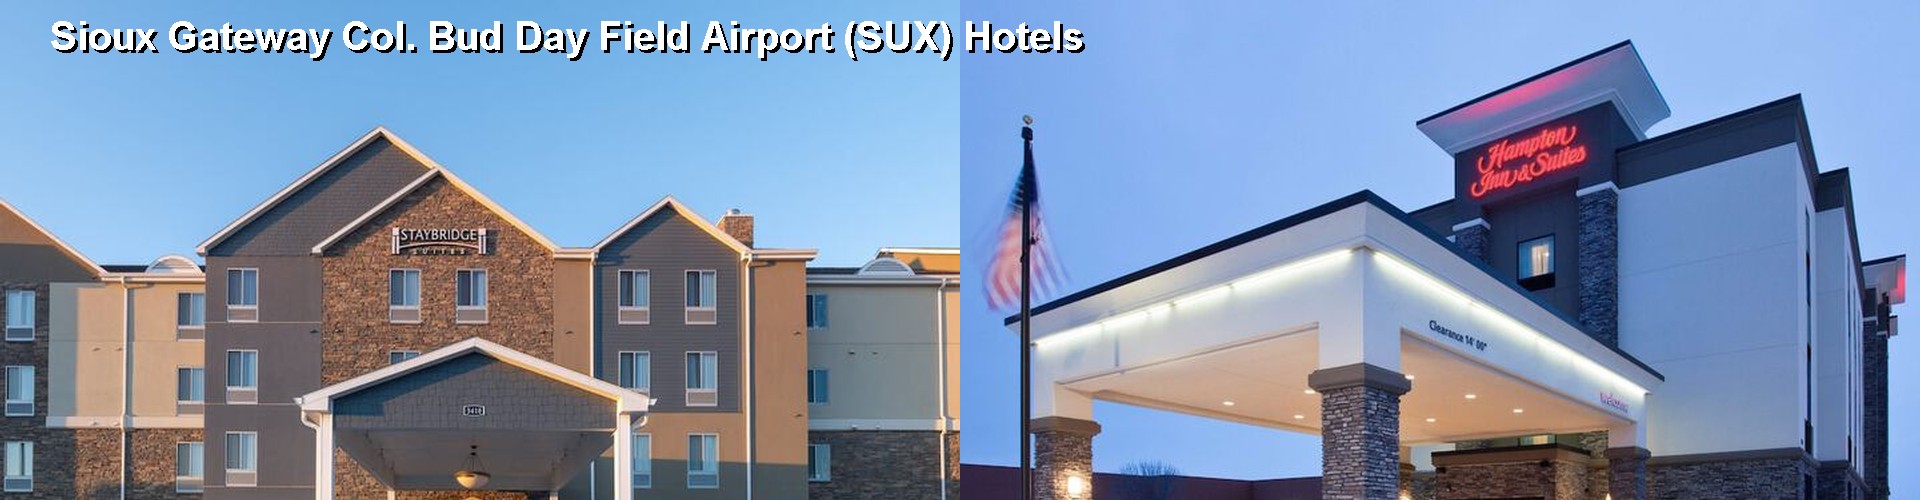 5 Best Hotels near Sioux Gateway Col. Bud Day Field Airport (SUX)